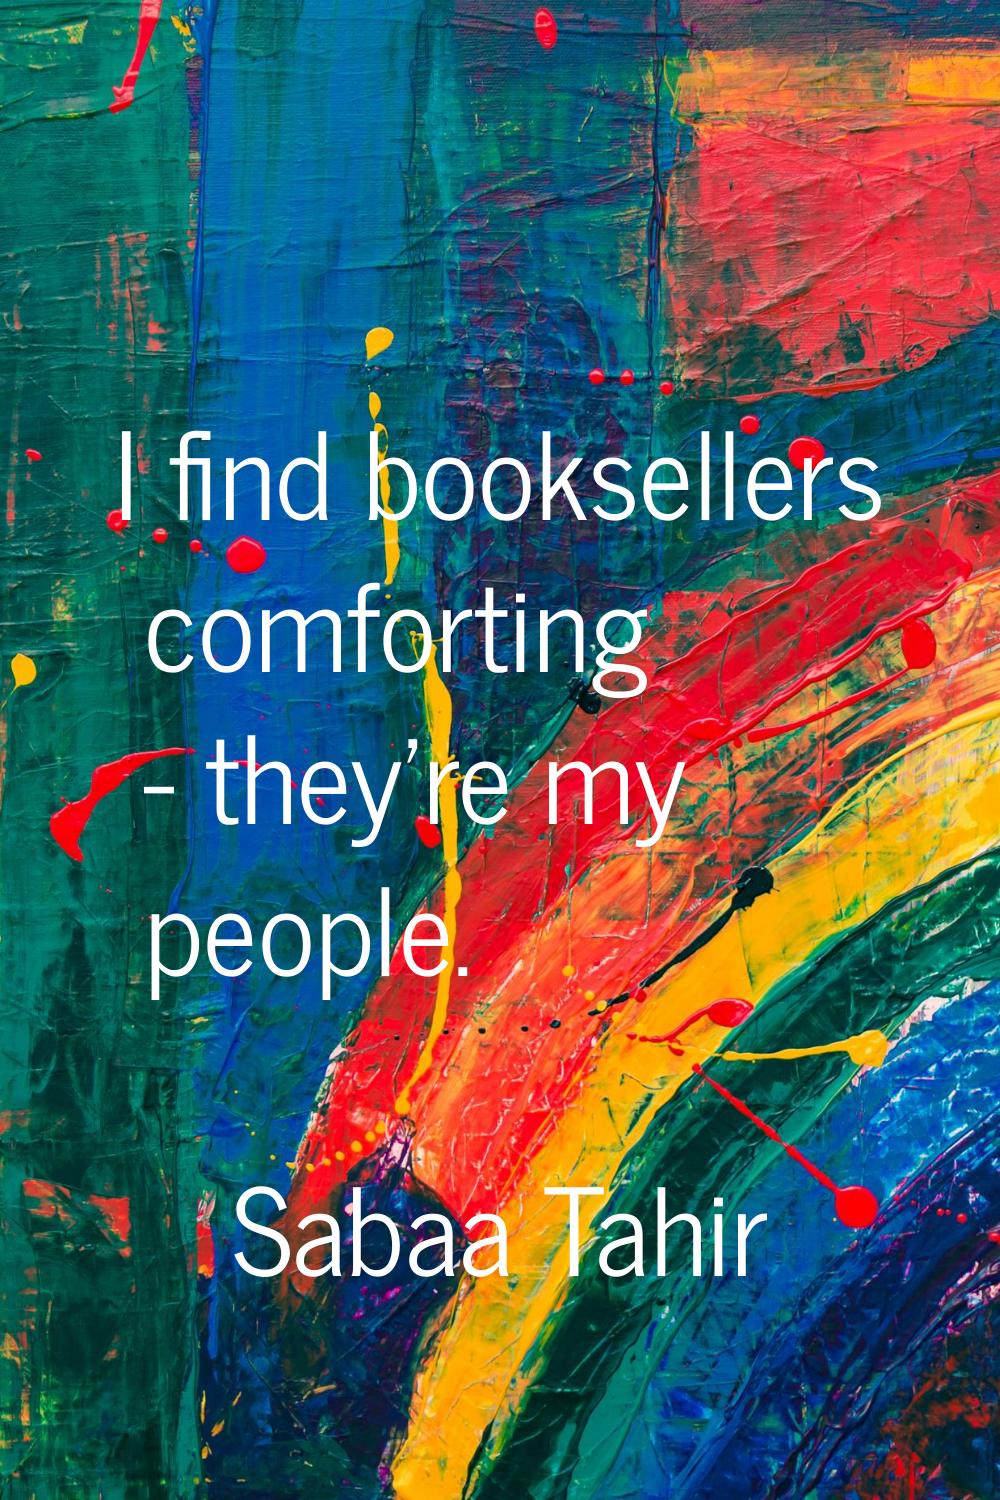 I find booksellers comforting - they're my people.